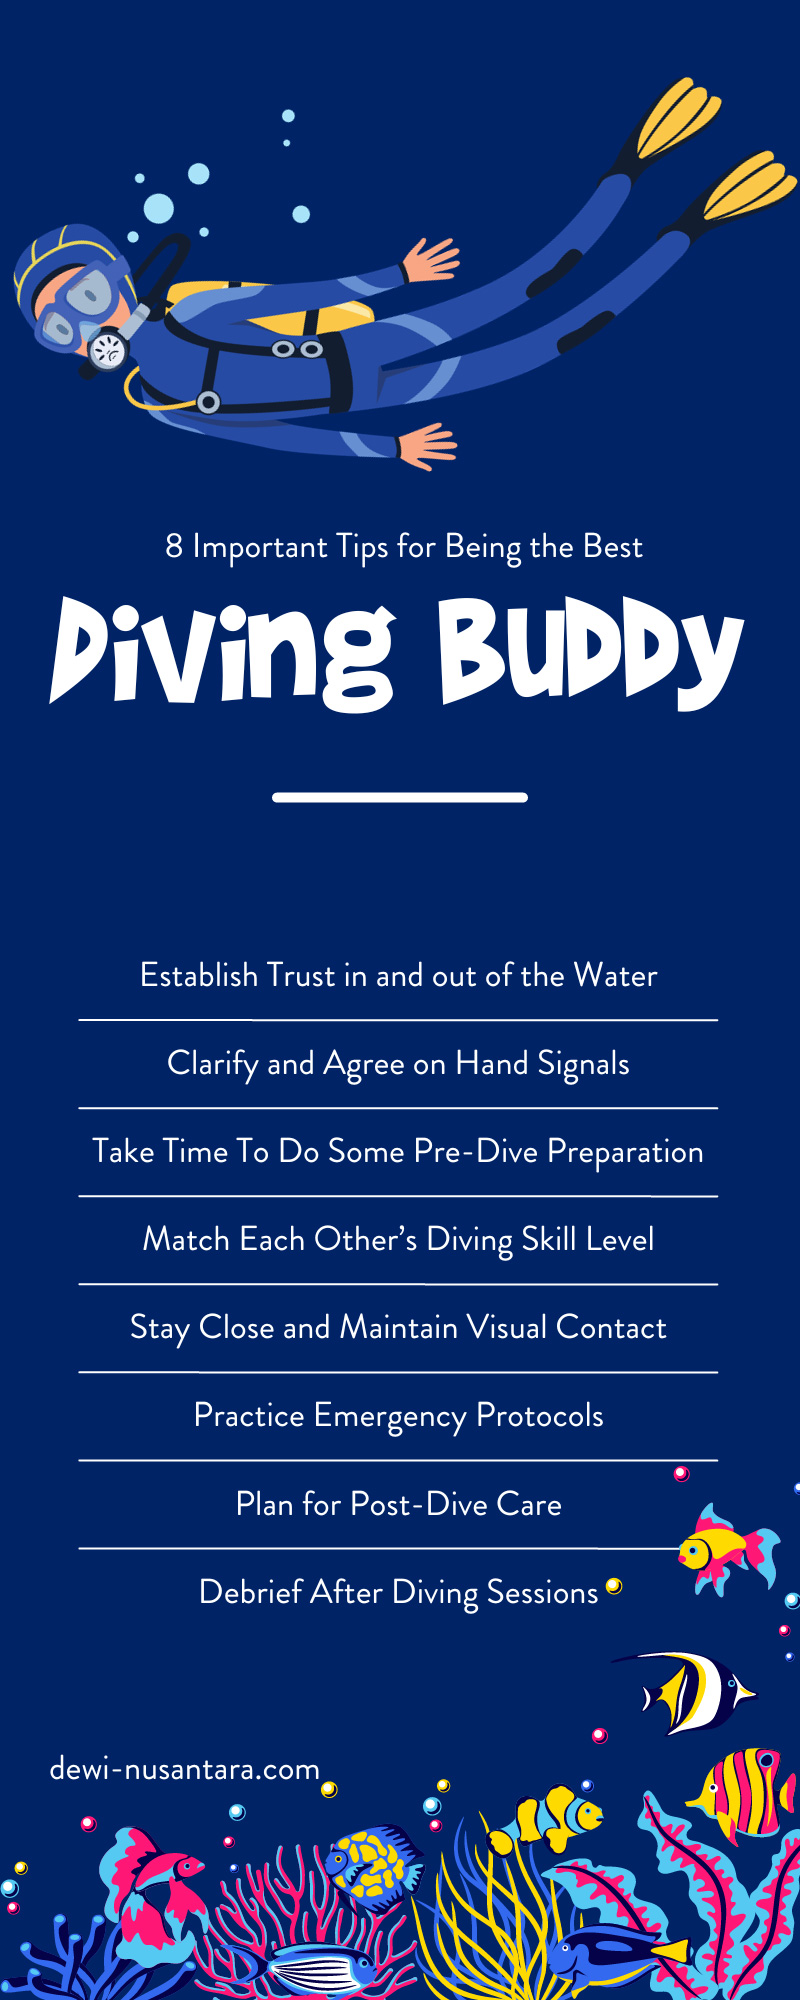 8 Important Tips for Being the Best Diving Buddy